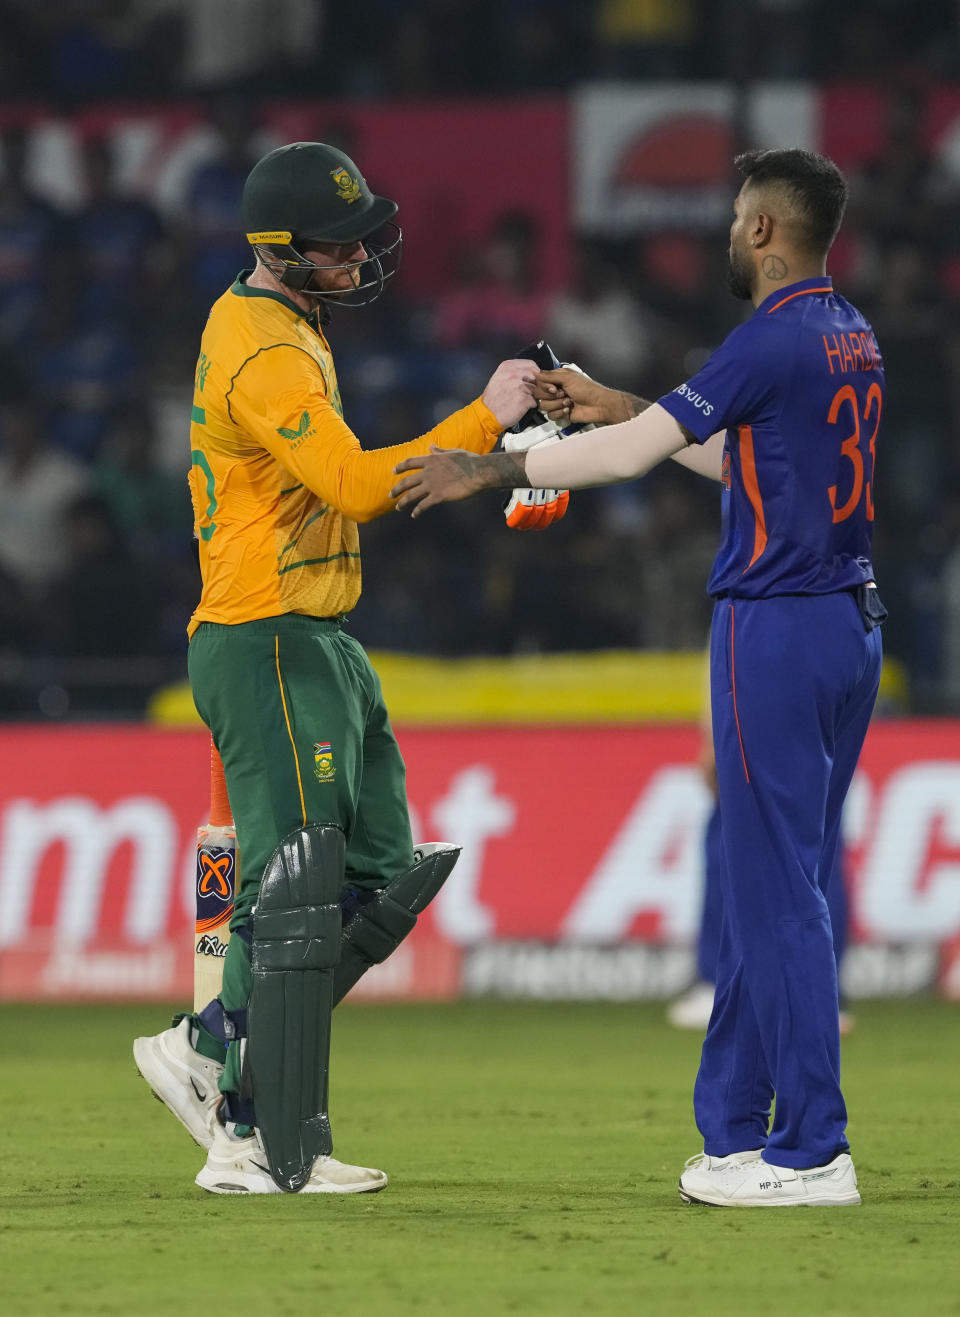 South Africa's Heinrich Klaasen walks after his dismissal as India's Hardik Pandya congratulates him for his innings during the second Twenty20 cricket match between India and South Africa in Cuttack, India, Sunday, June 12, 2022. (AP Photo/Bikas Das)